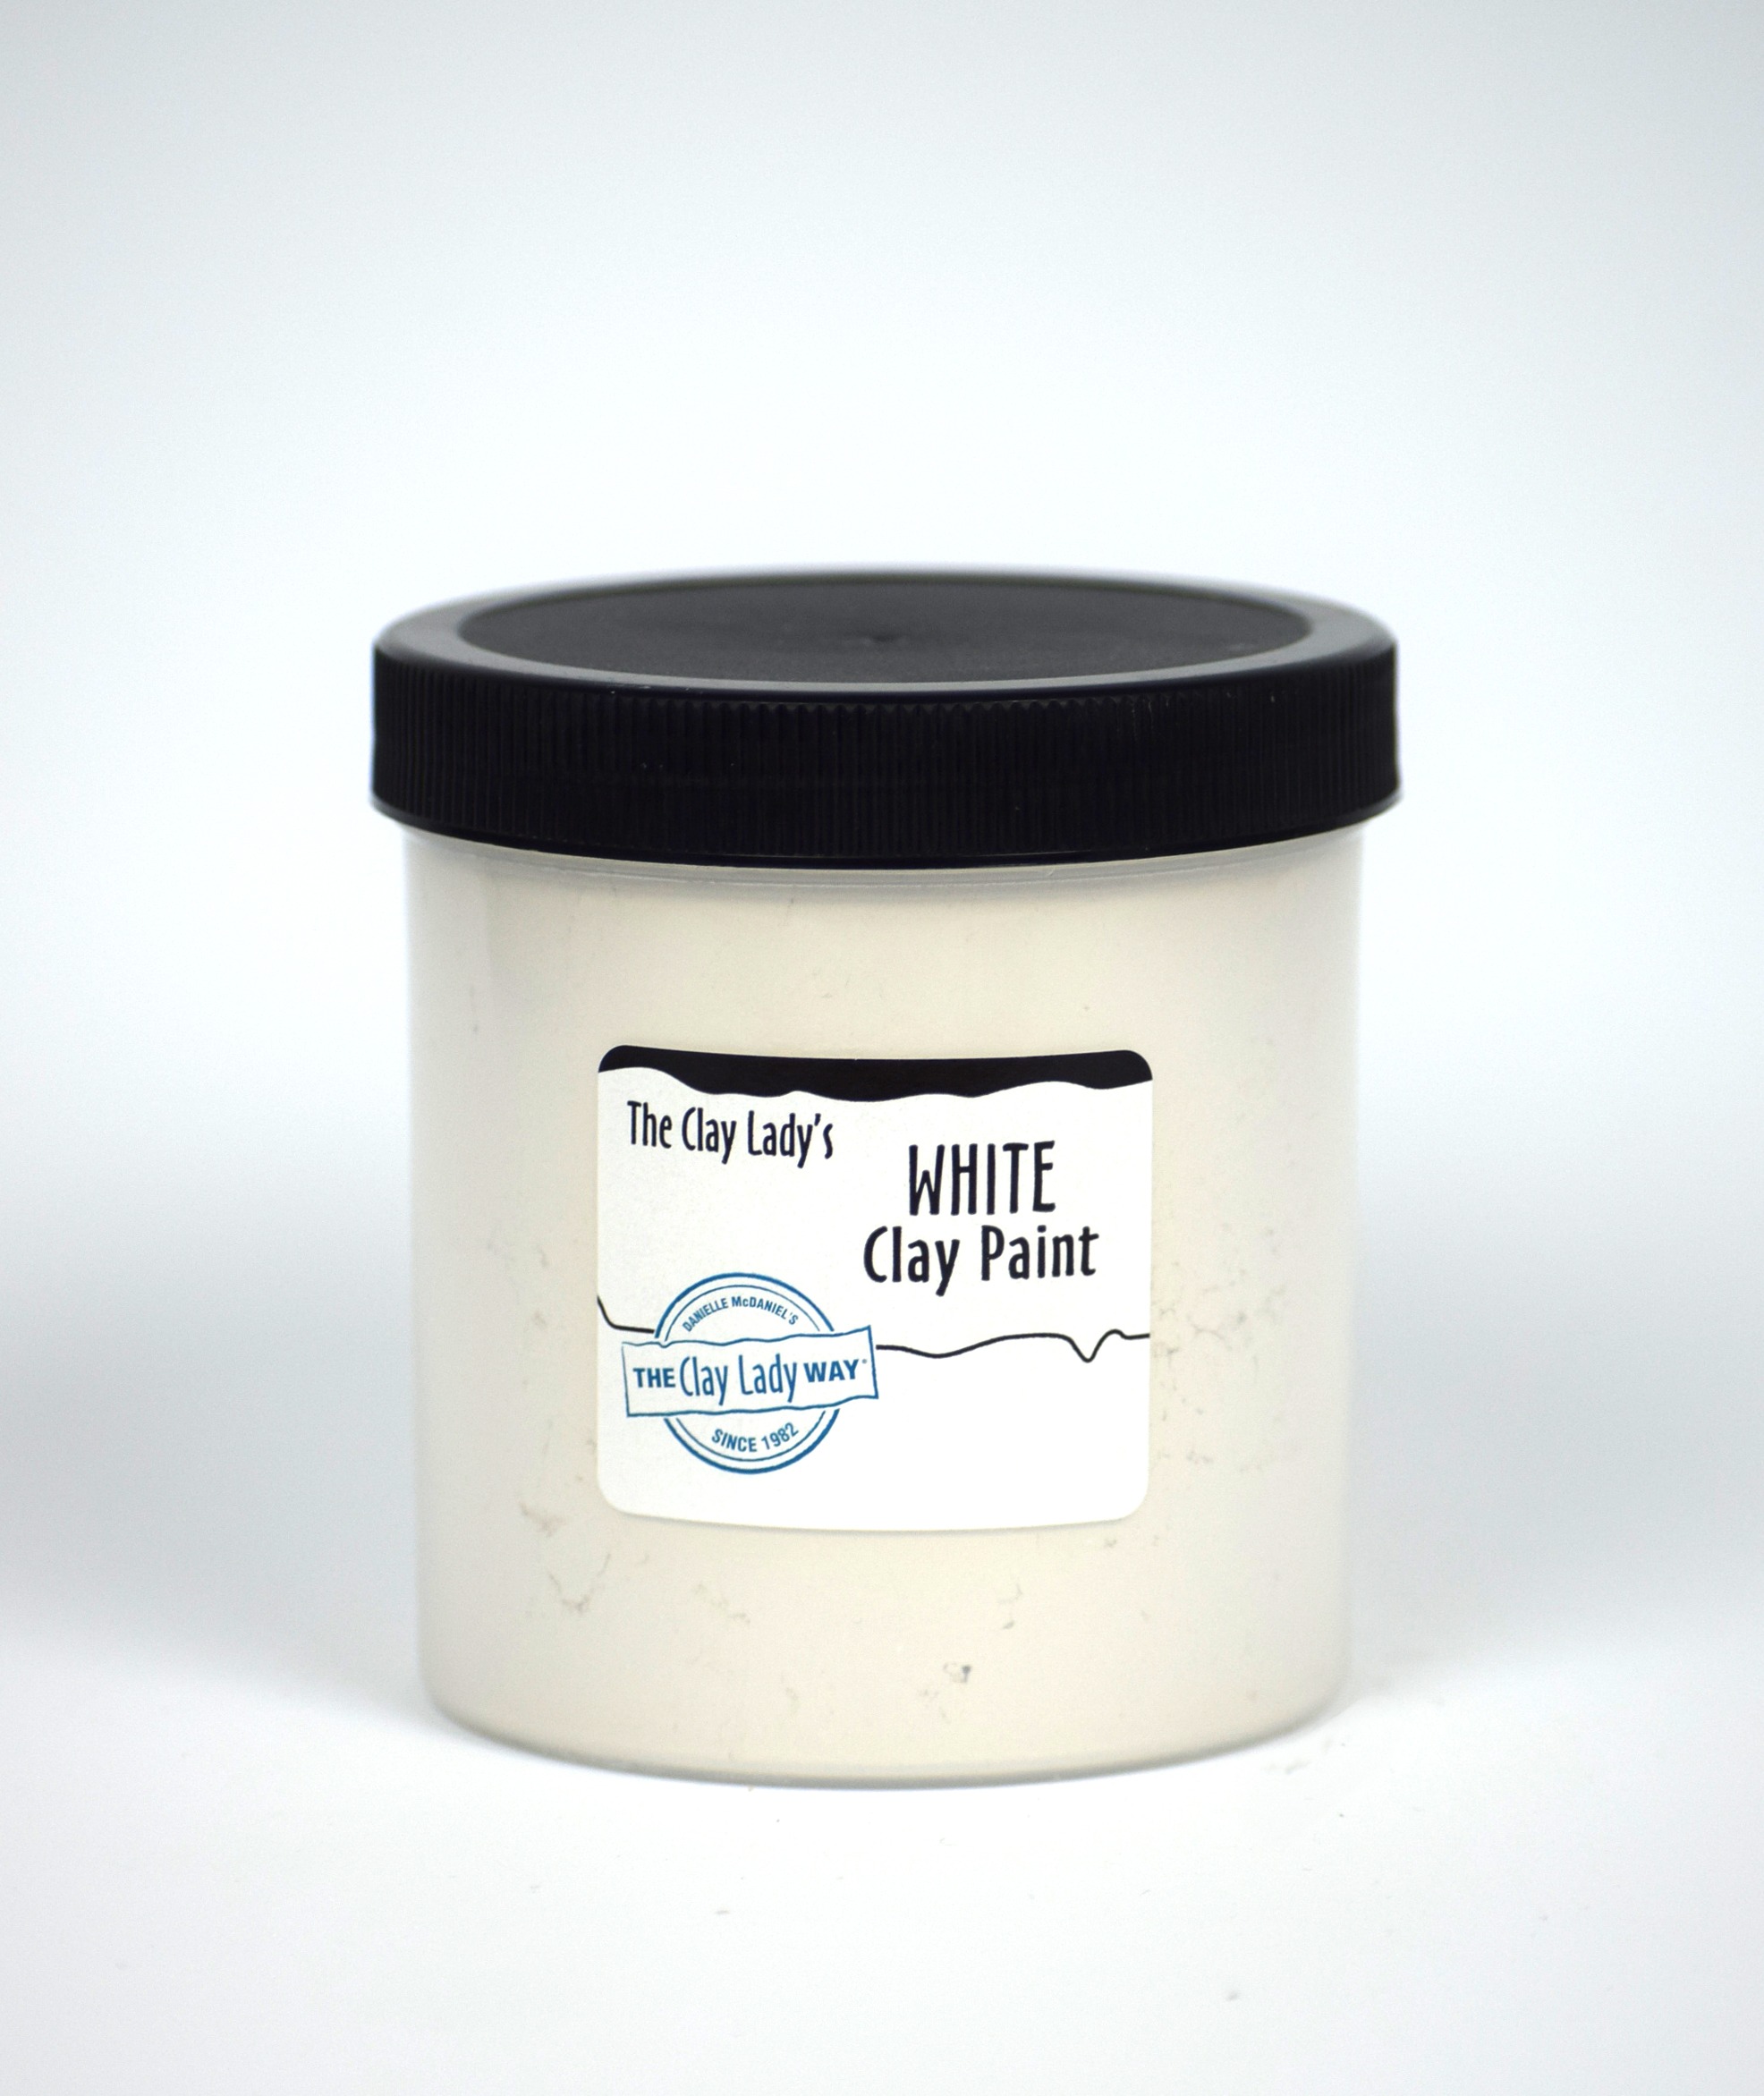 The Clay Lady's White Clay Paint - Mid-South Ceramics